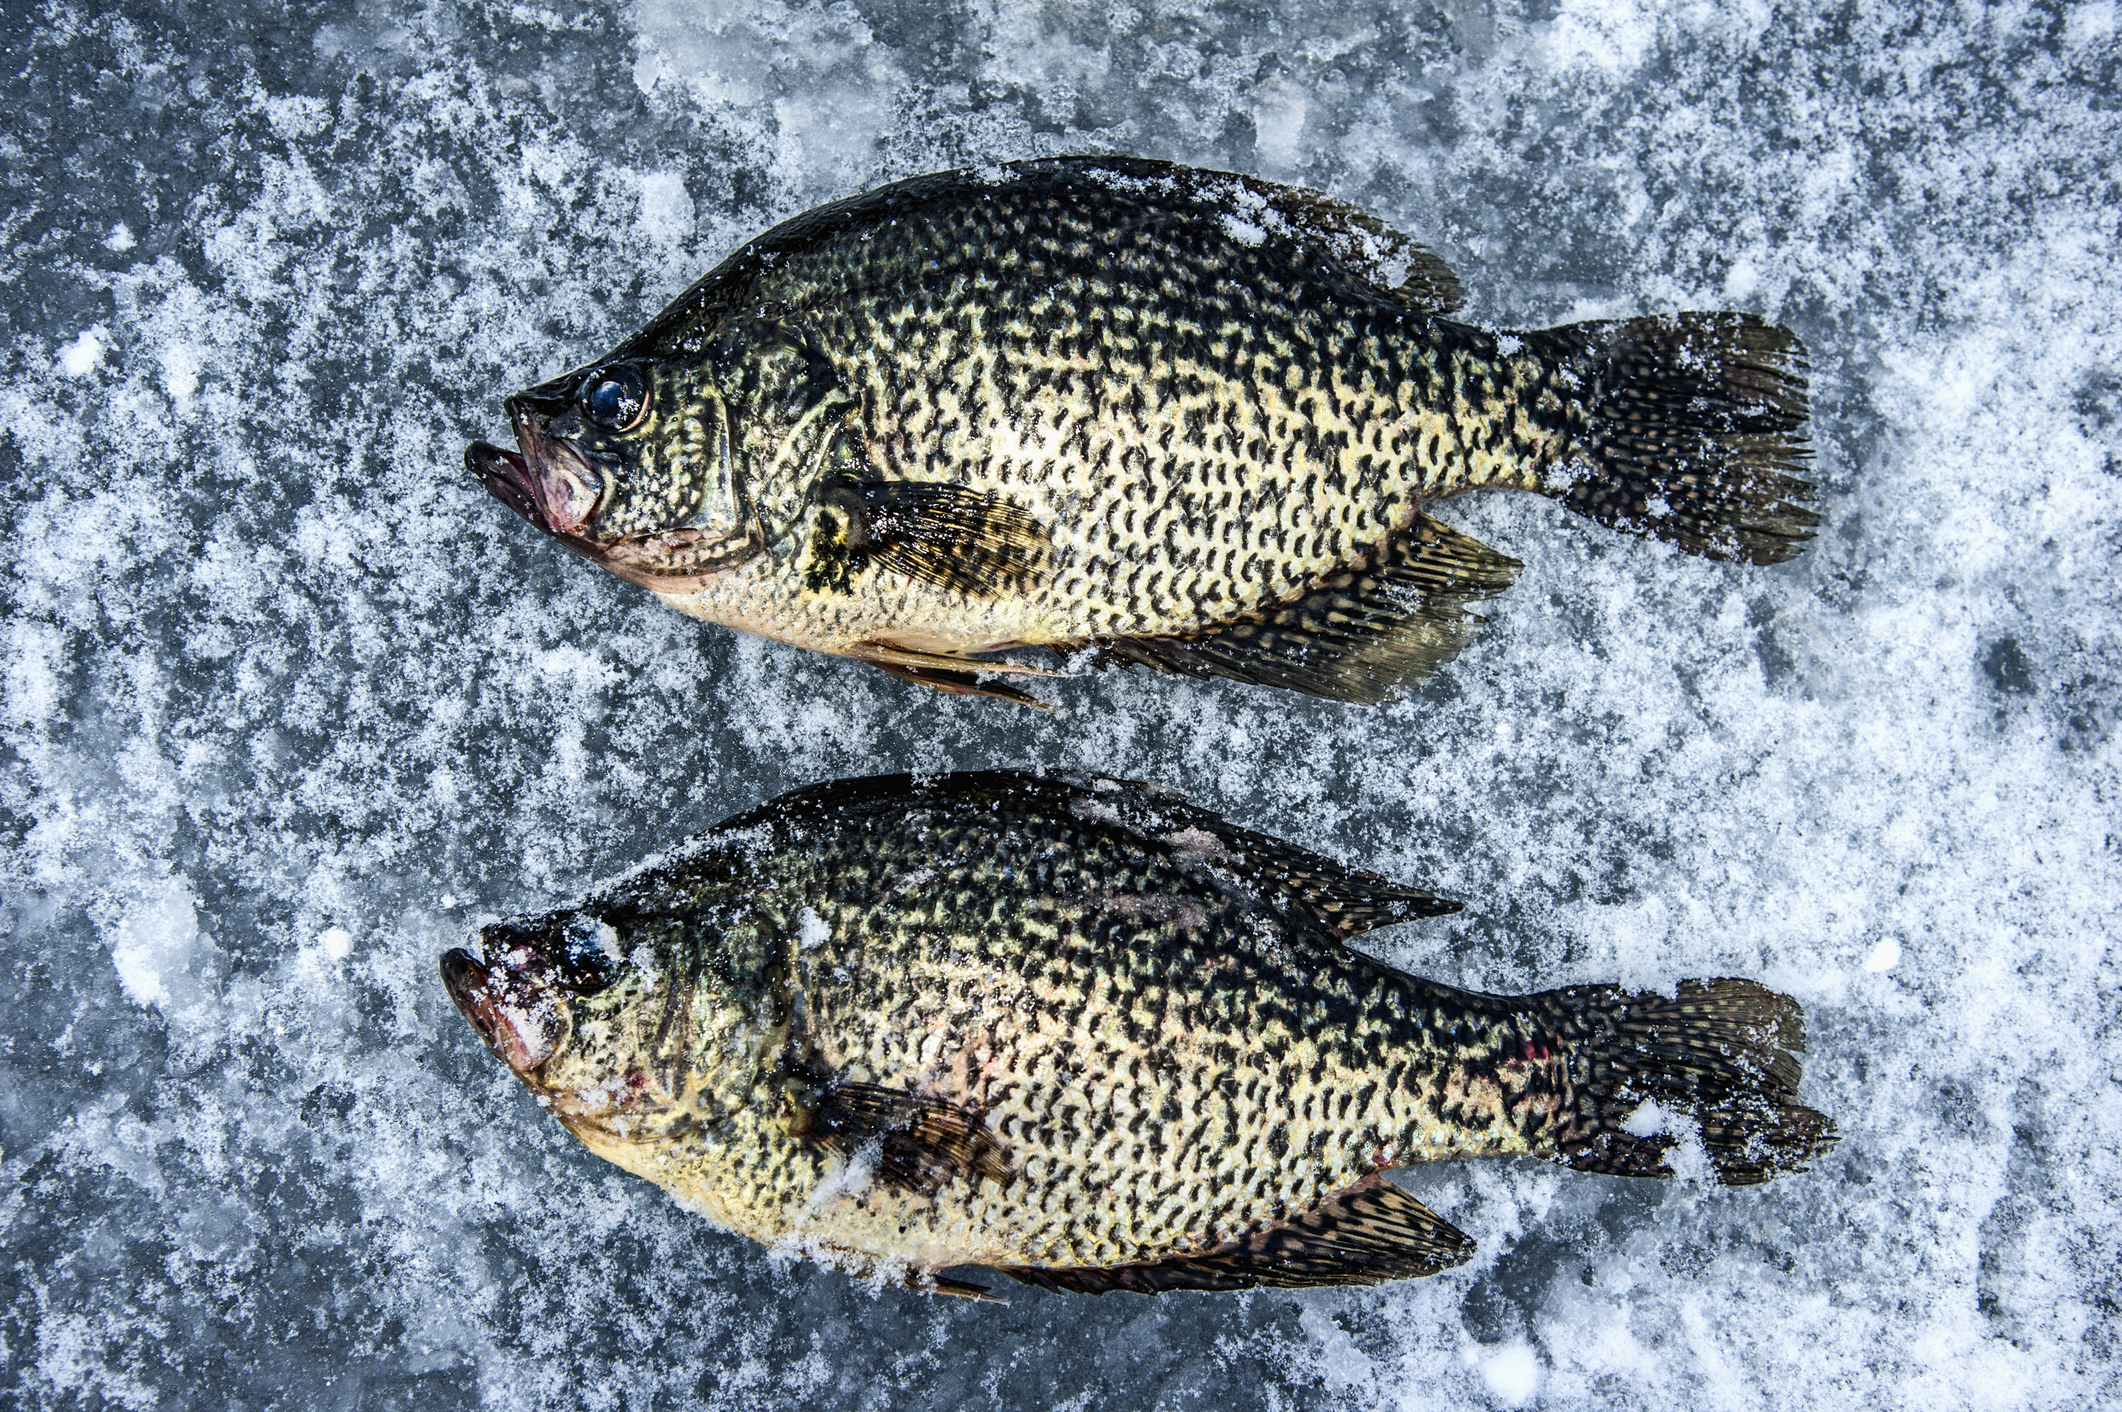 Potential competition between black crappie and invasive white